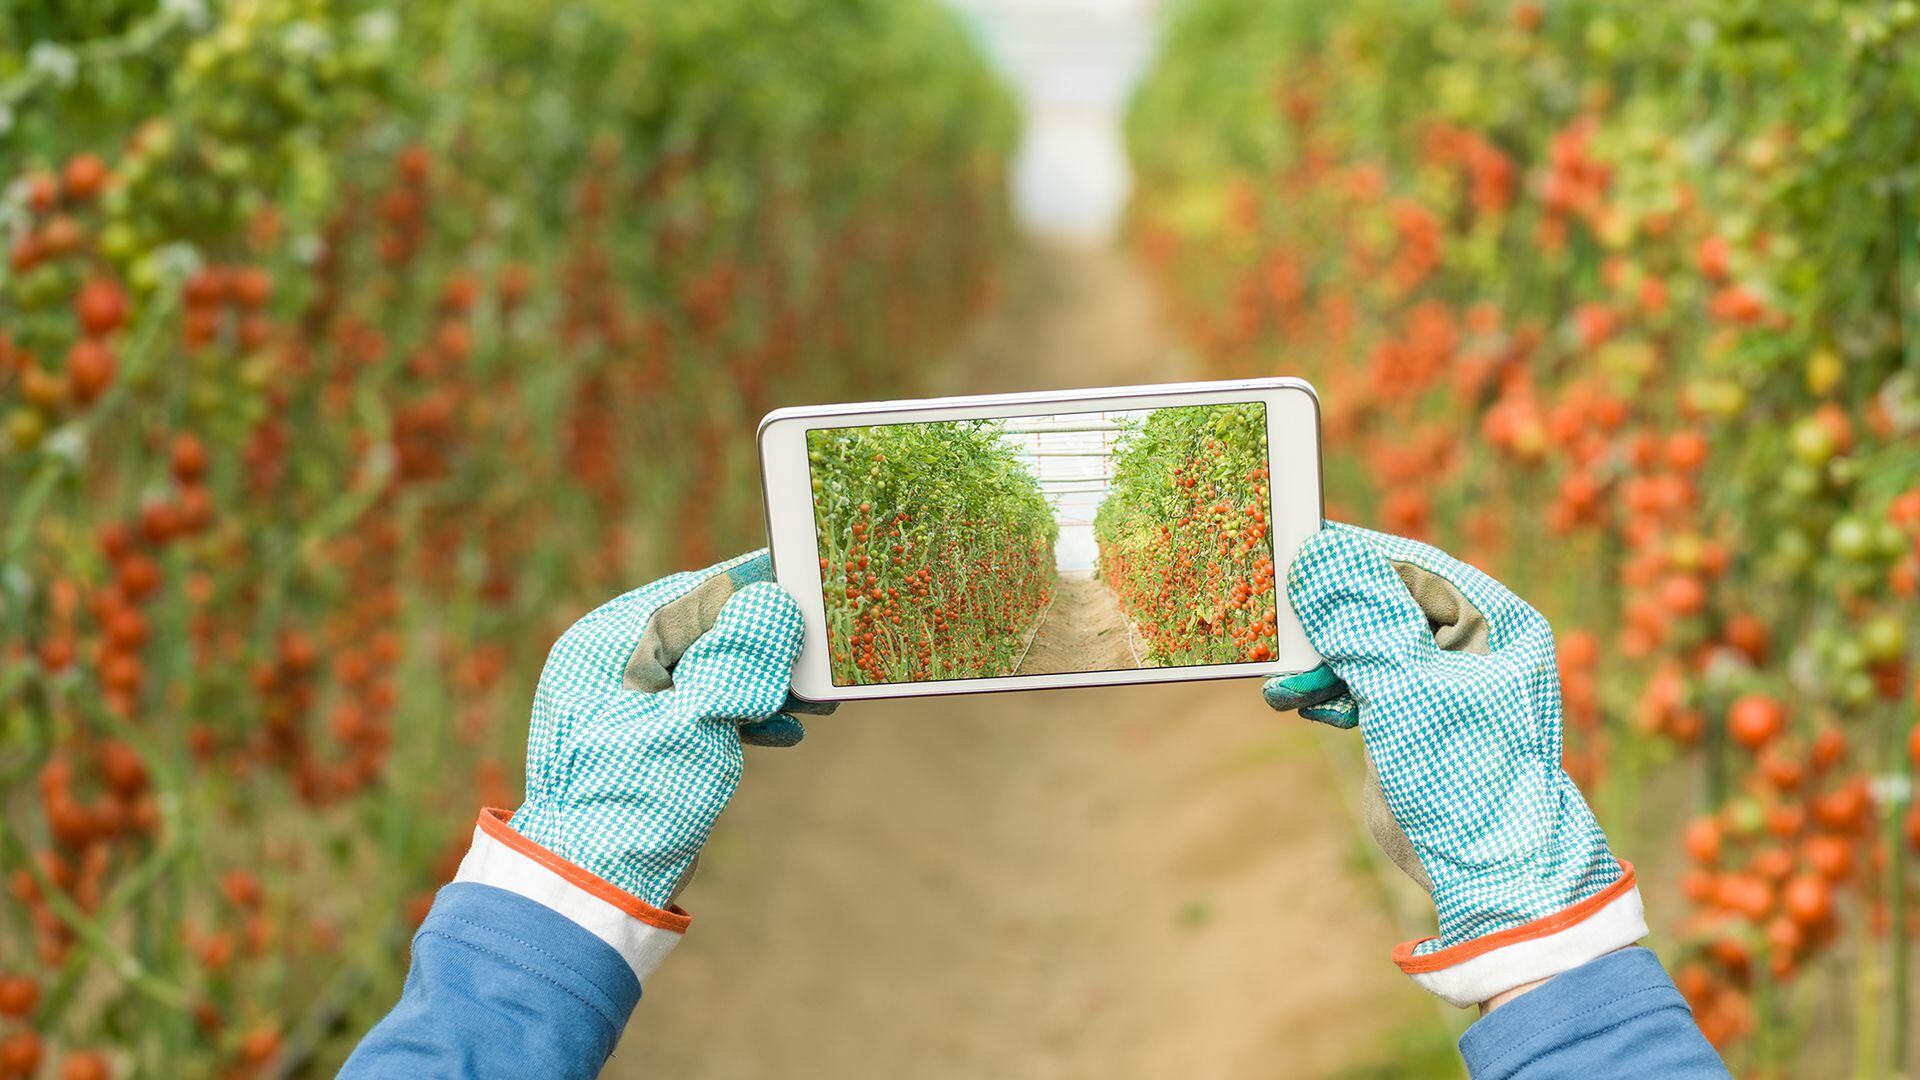 Digital tablet with blank screen in human hand with gardening gloves in tomato greenhouse. The touch screen is isolated with clipping path for copy space. Shot in day light with a medium format camera.